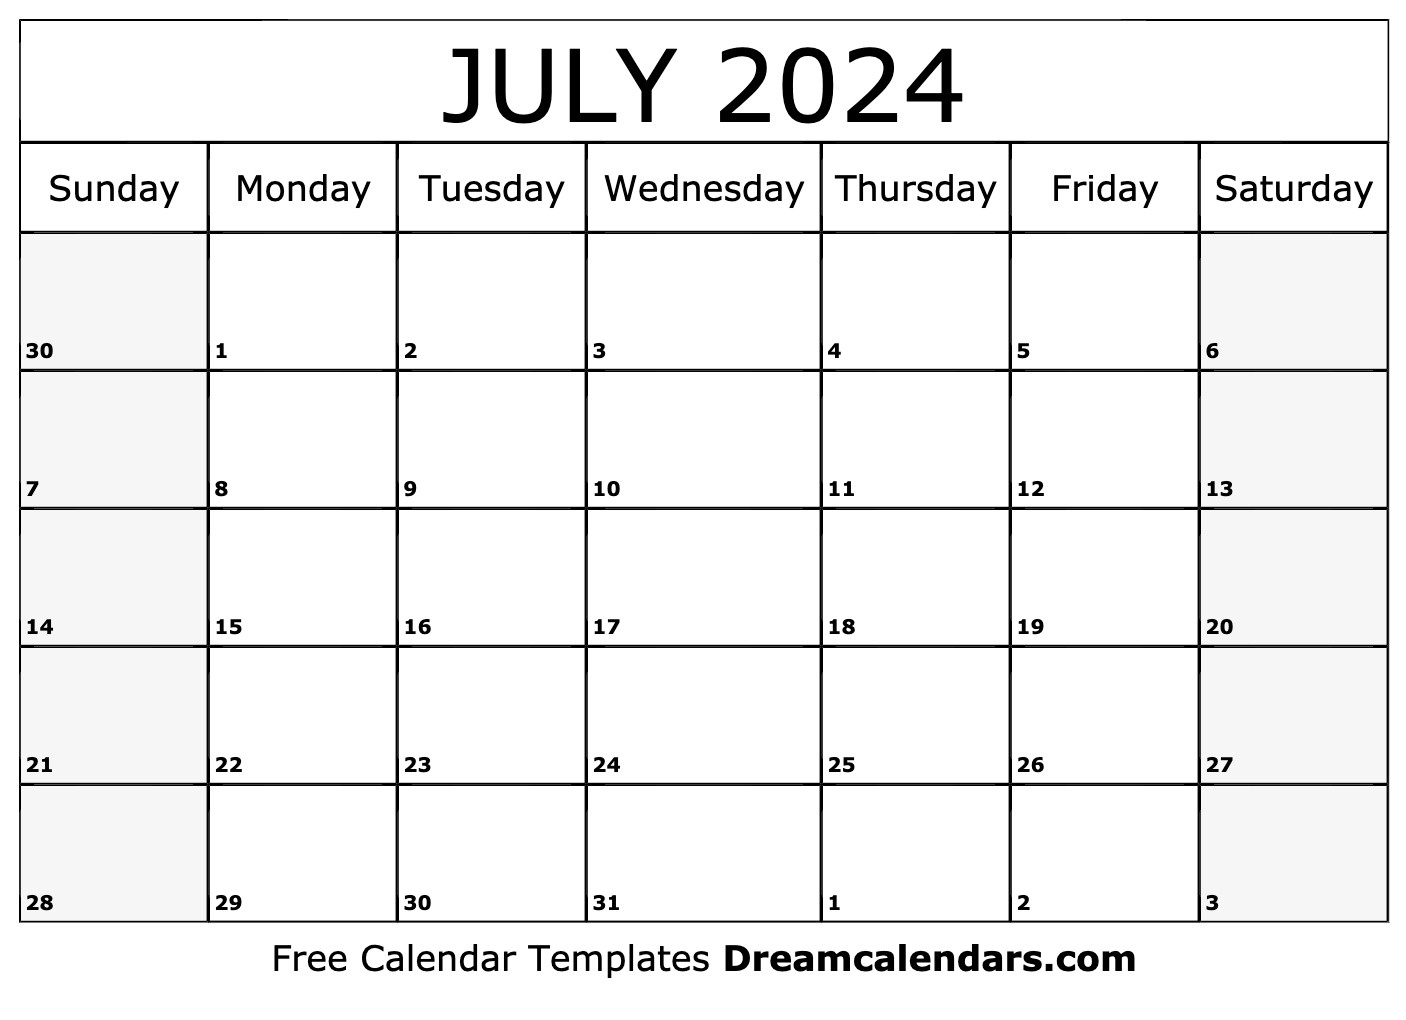 July 2024 Calendar - Free Printable With Holidays And Observances with regard to 21St July 2024 Calendar Printable